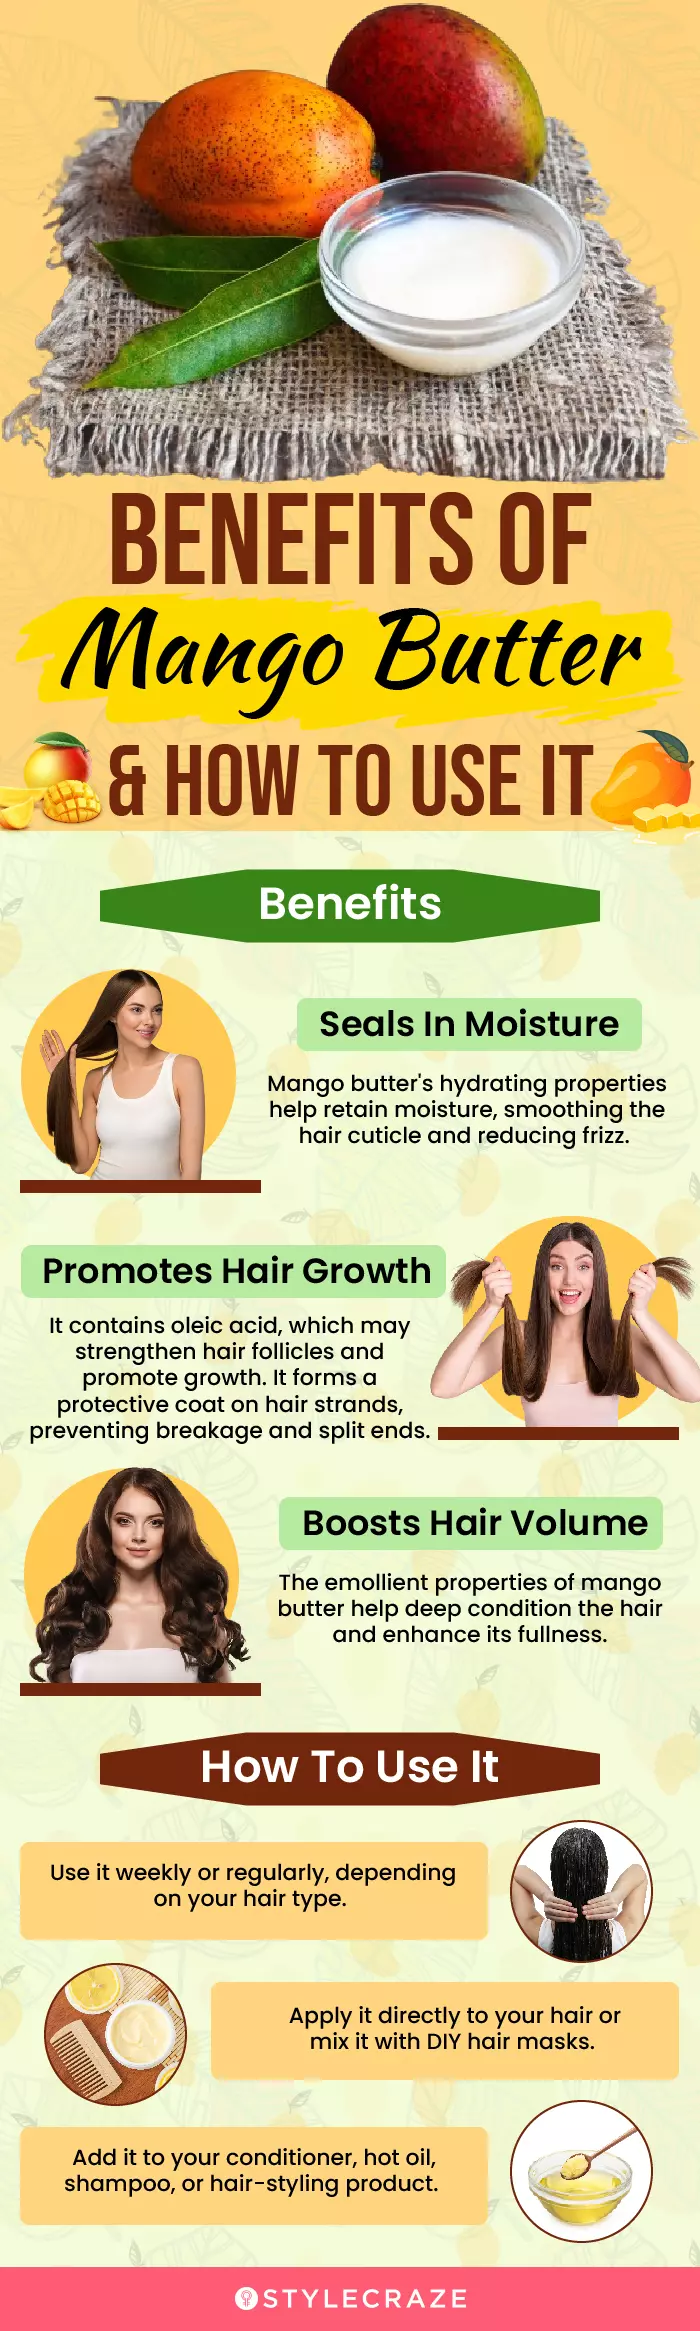 benefits of mango butter and how to use it (infographic)